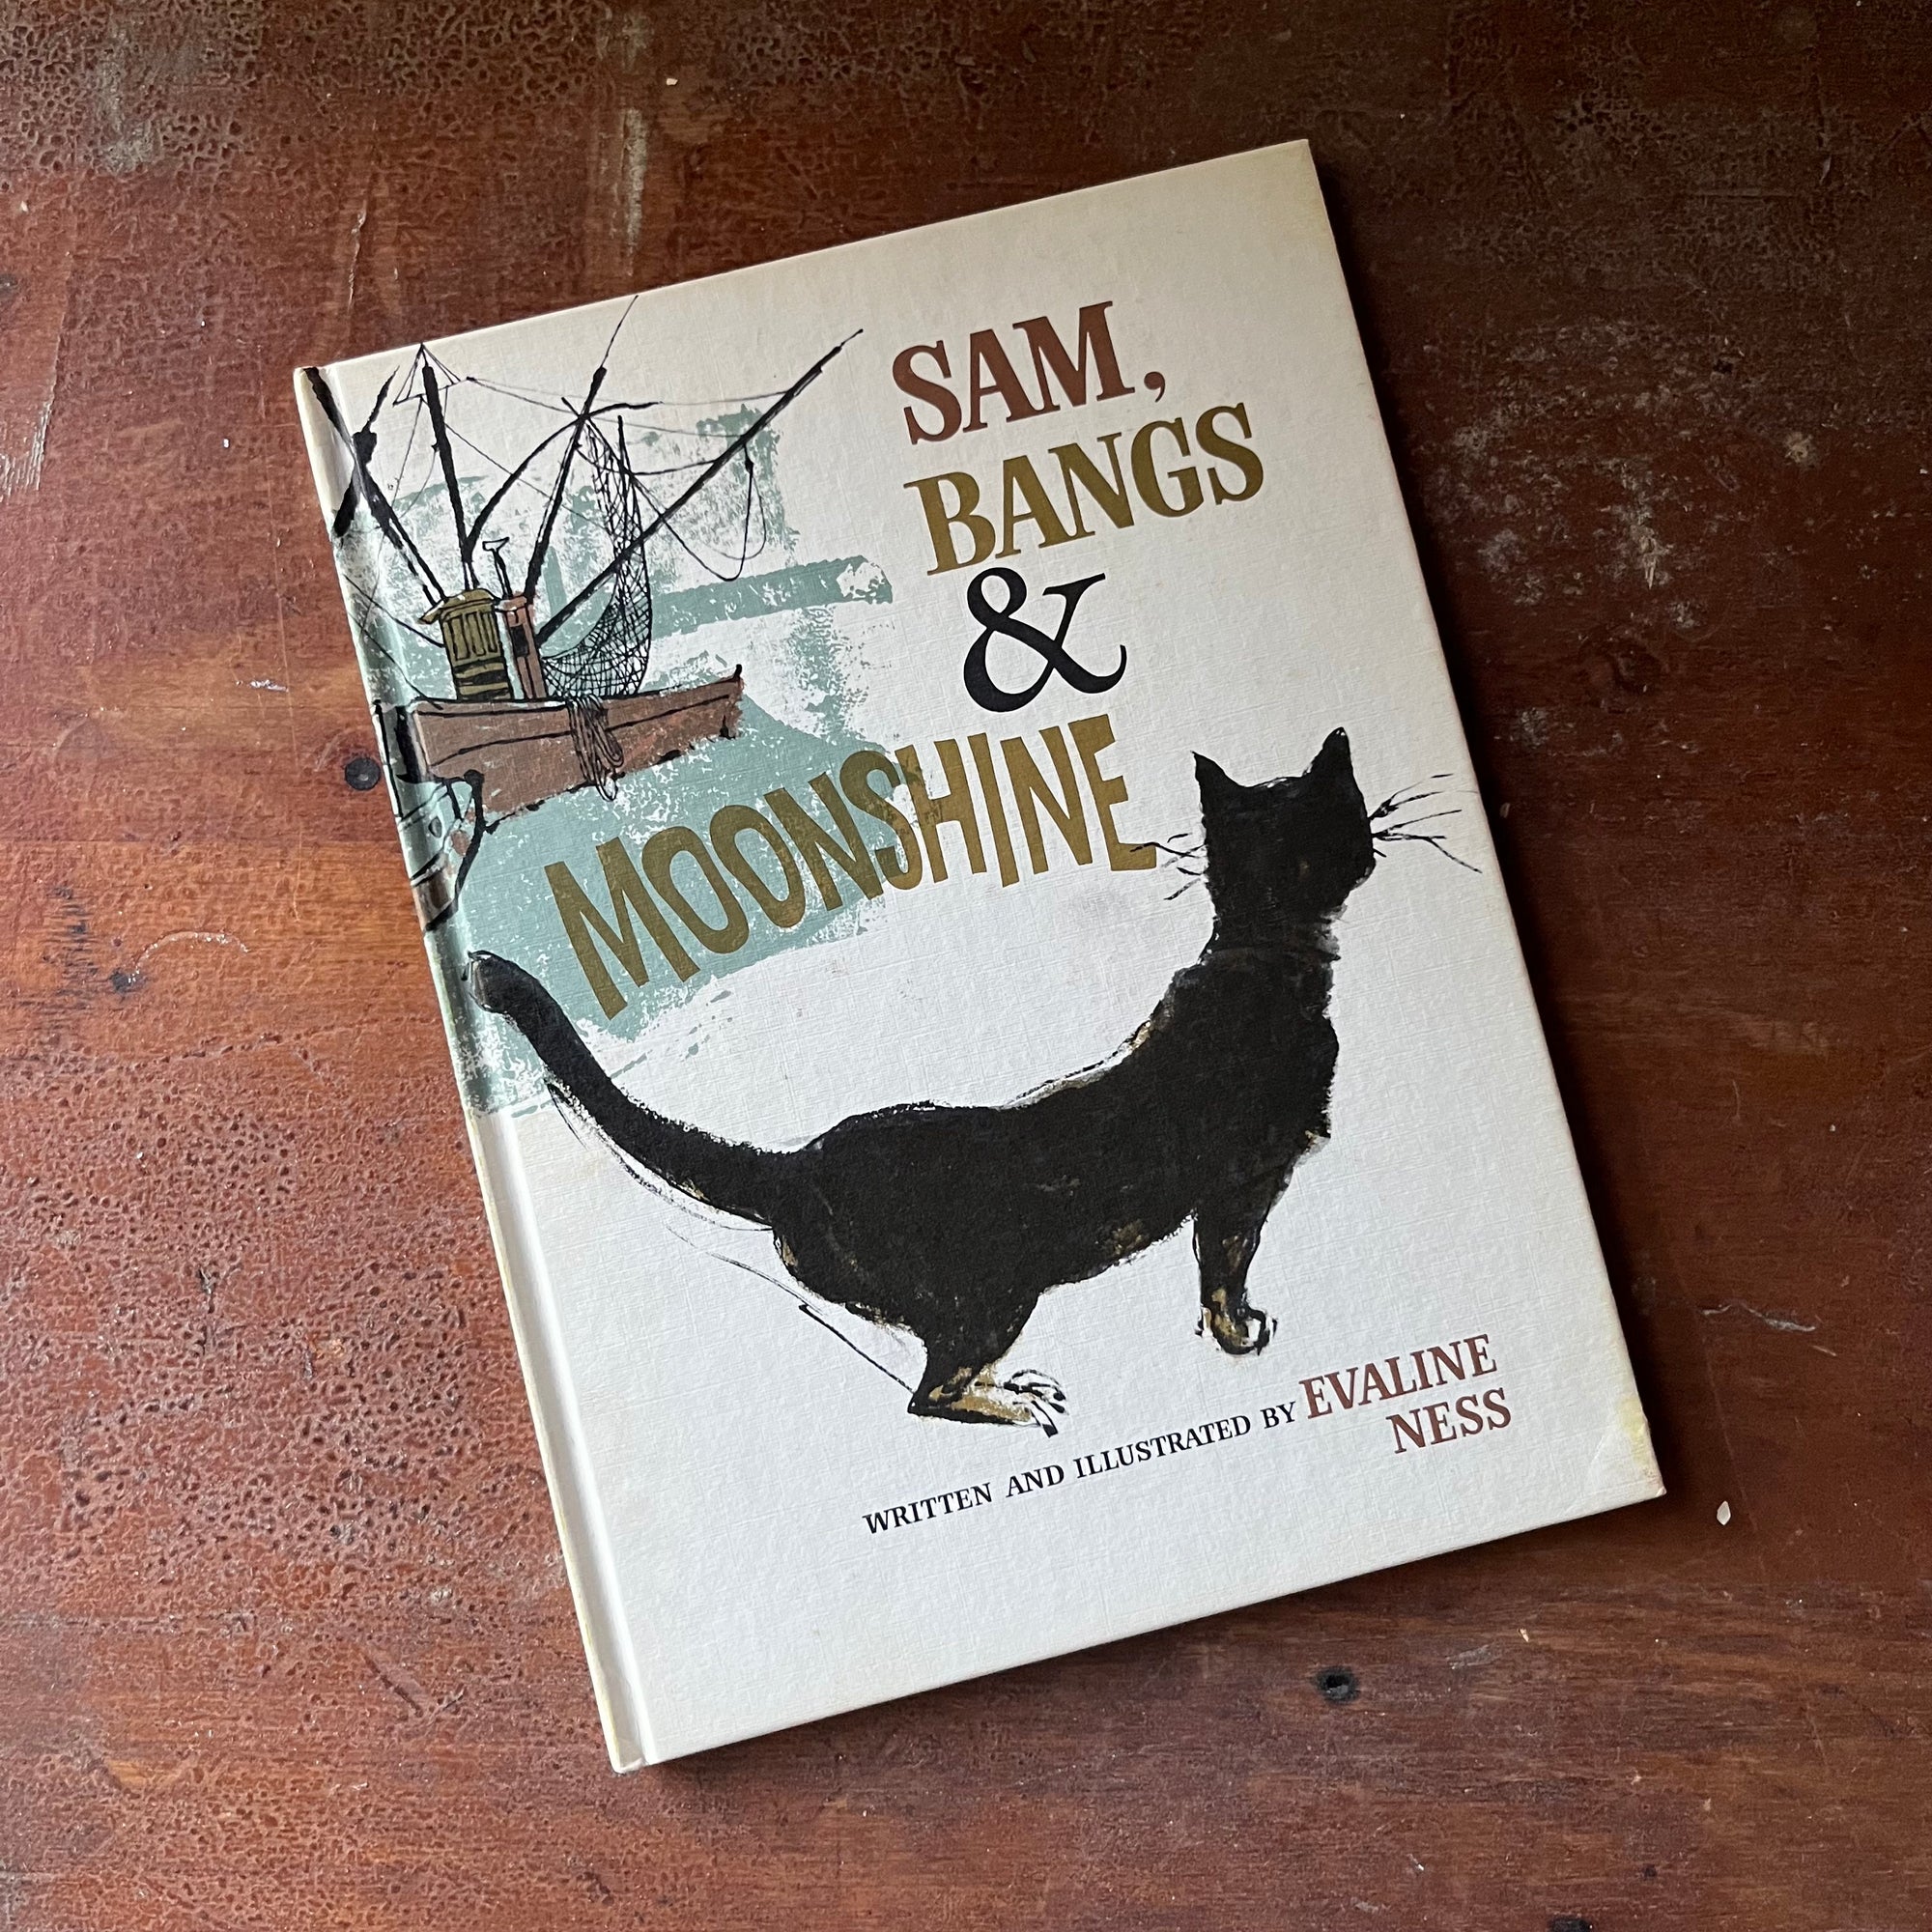 vintage children's picture book, 1967 Caldecott Medal Winner - Sam, Bangs & Moonshine written & illustrated by Evaline Ness - view of the front cover with an illustration of Bangs the cat & a fishing boat in the background